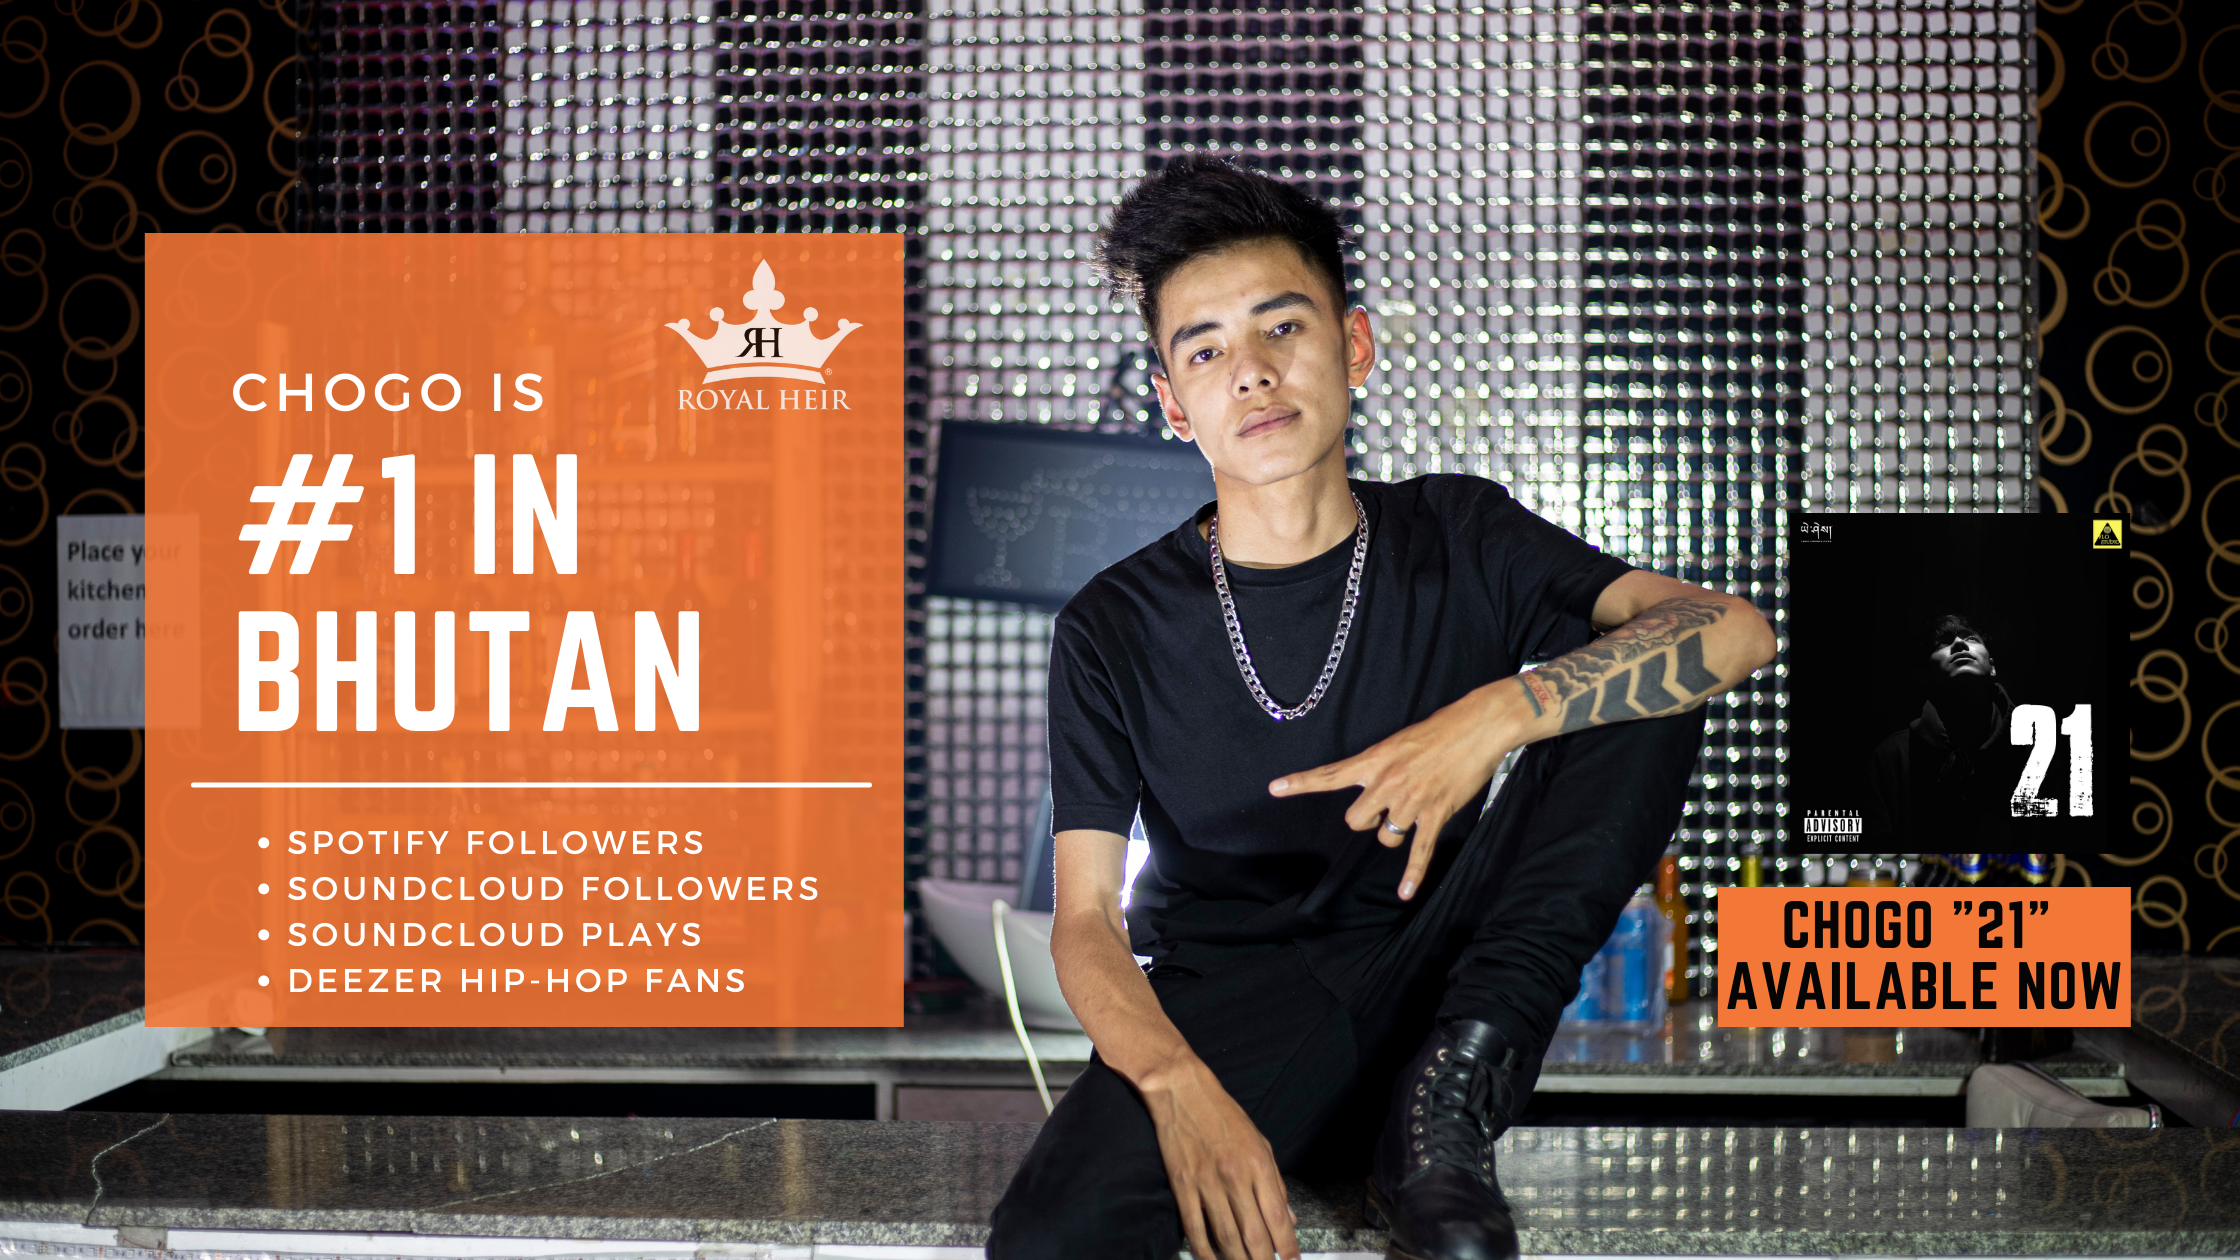 Asian rapper signed to Royal Heir Entertainment hits number 1 in Bhutan on streaming platforms